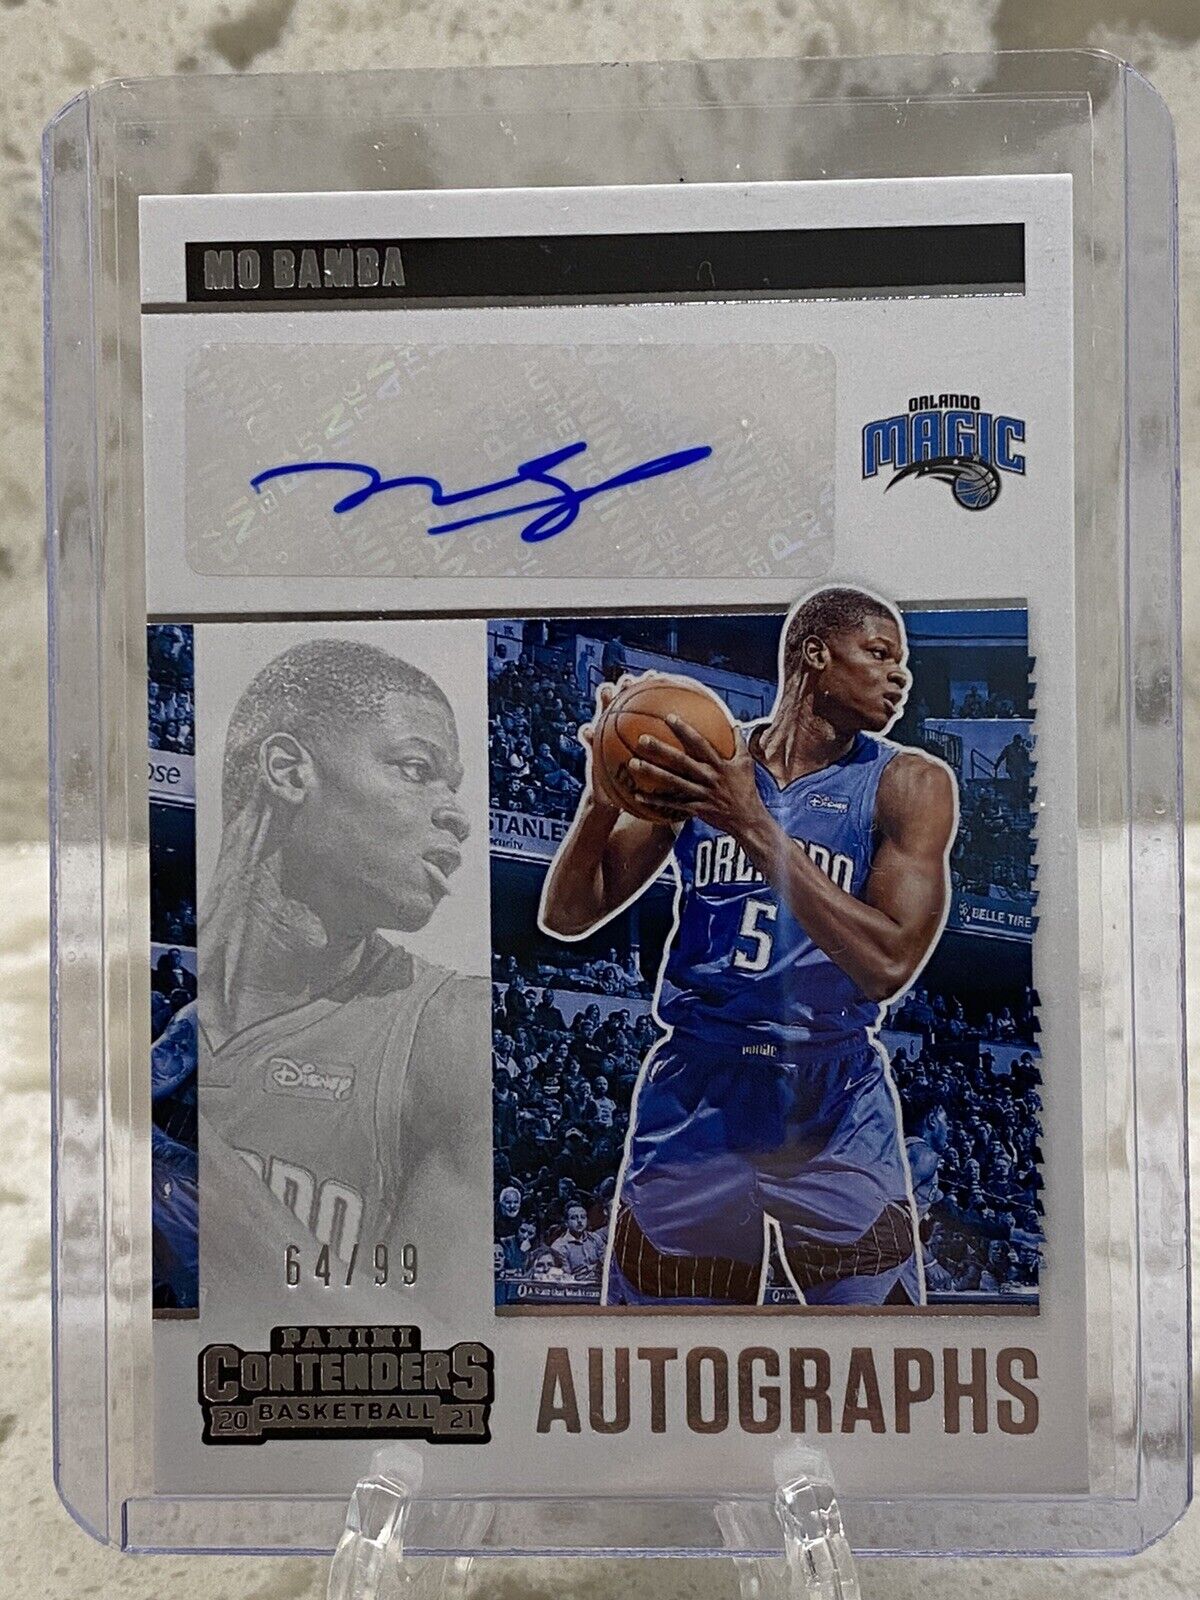 ‘20-21 Mo Bamba Panini Contenders Autographs 64/99 Great Investment Future Star